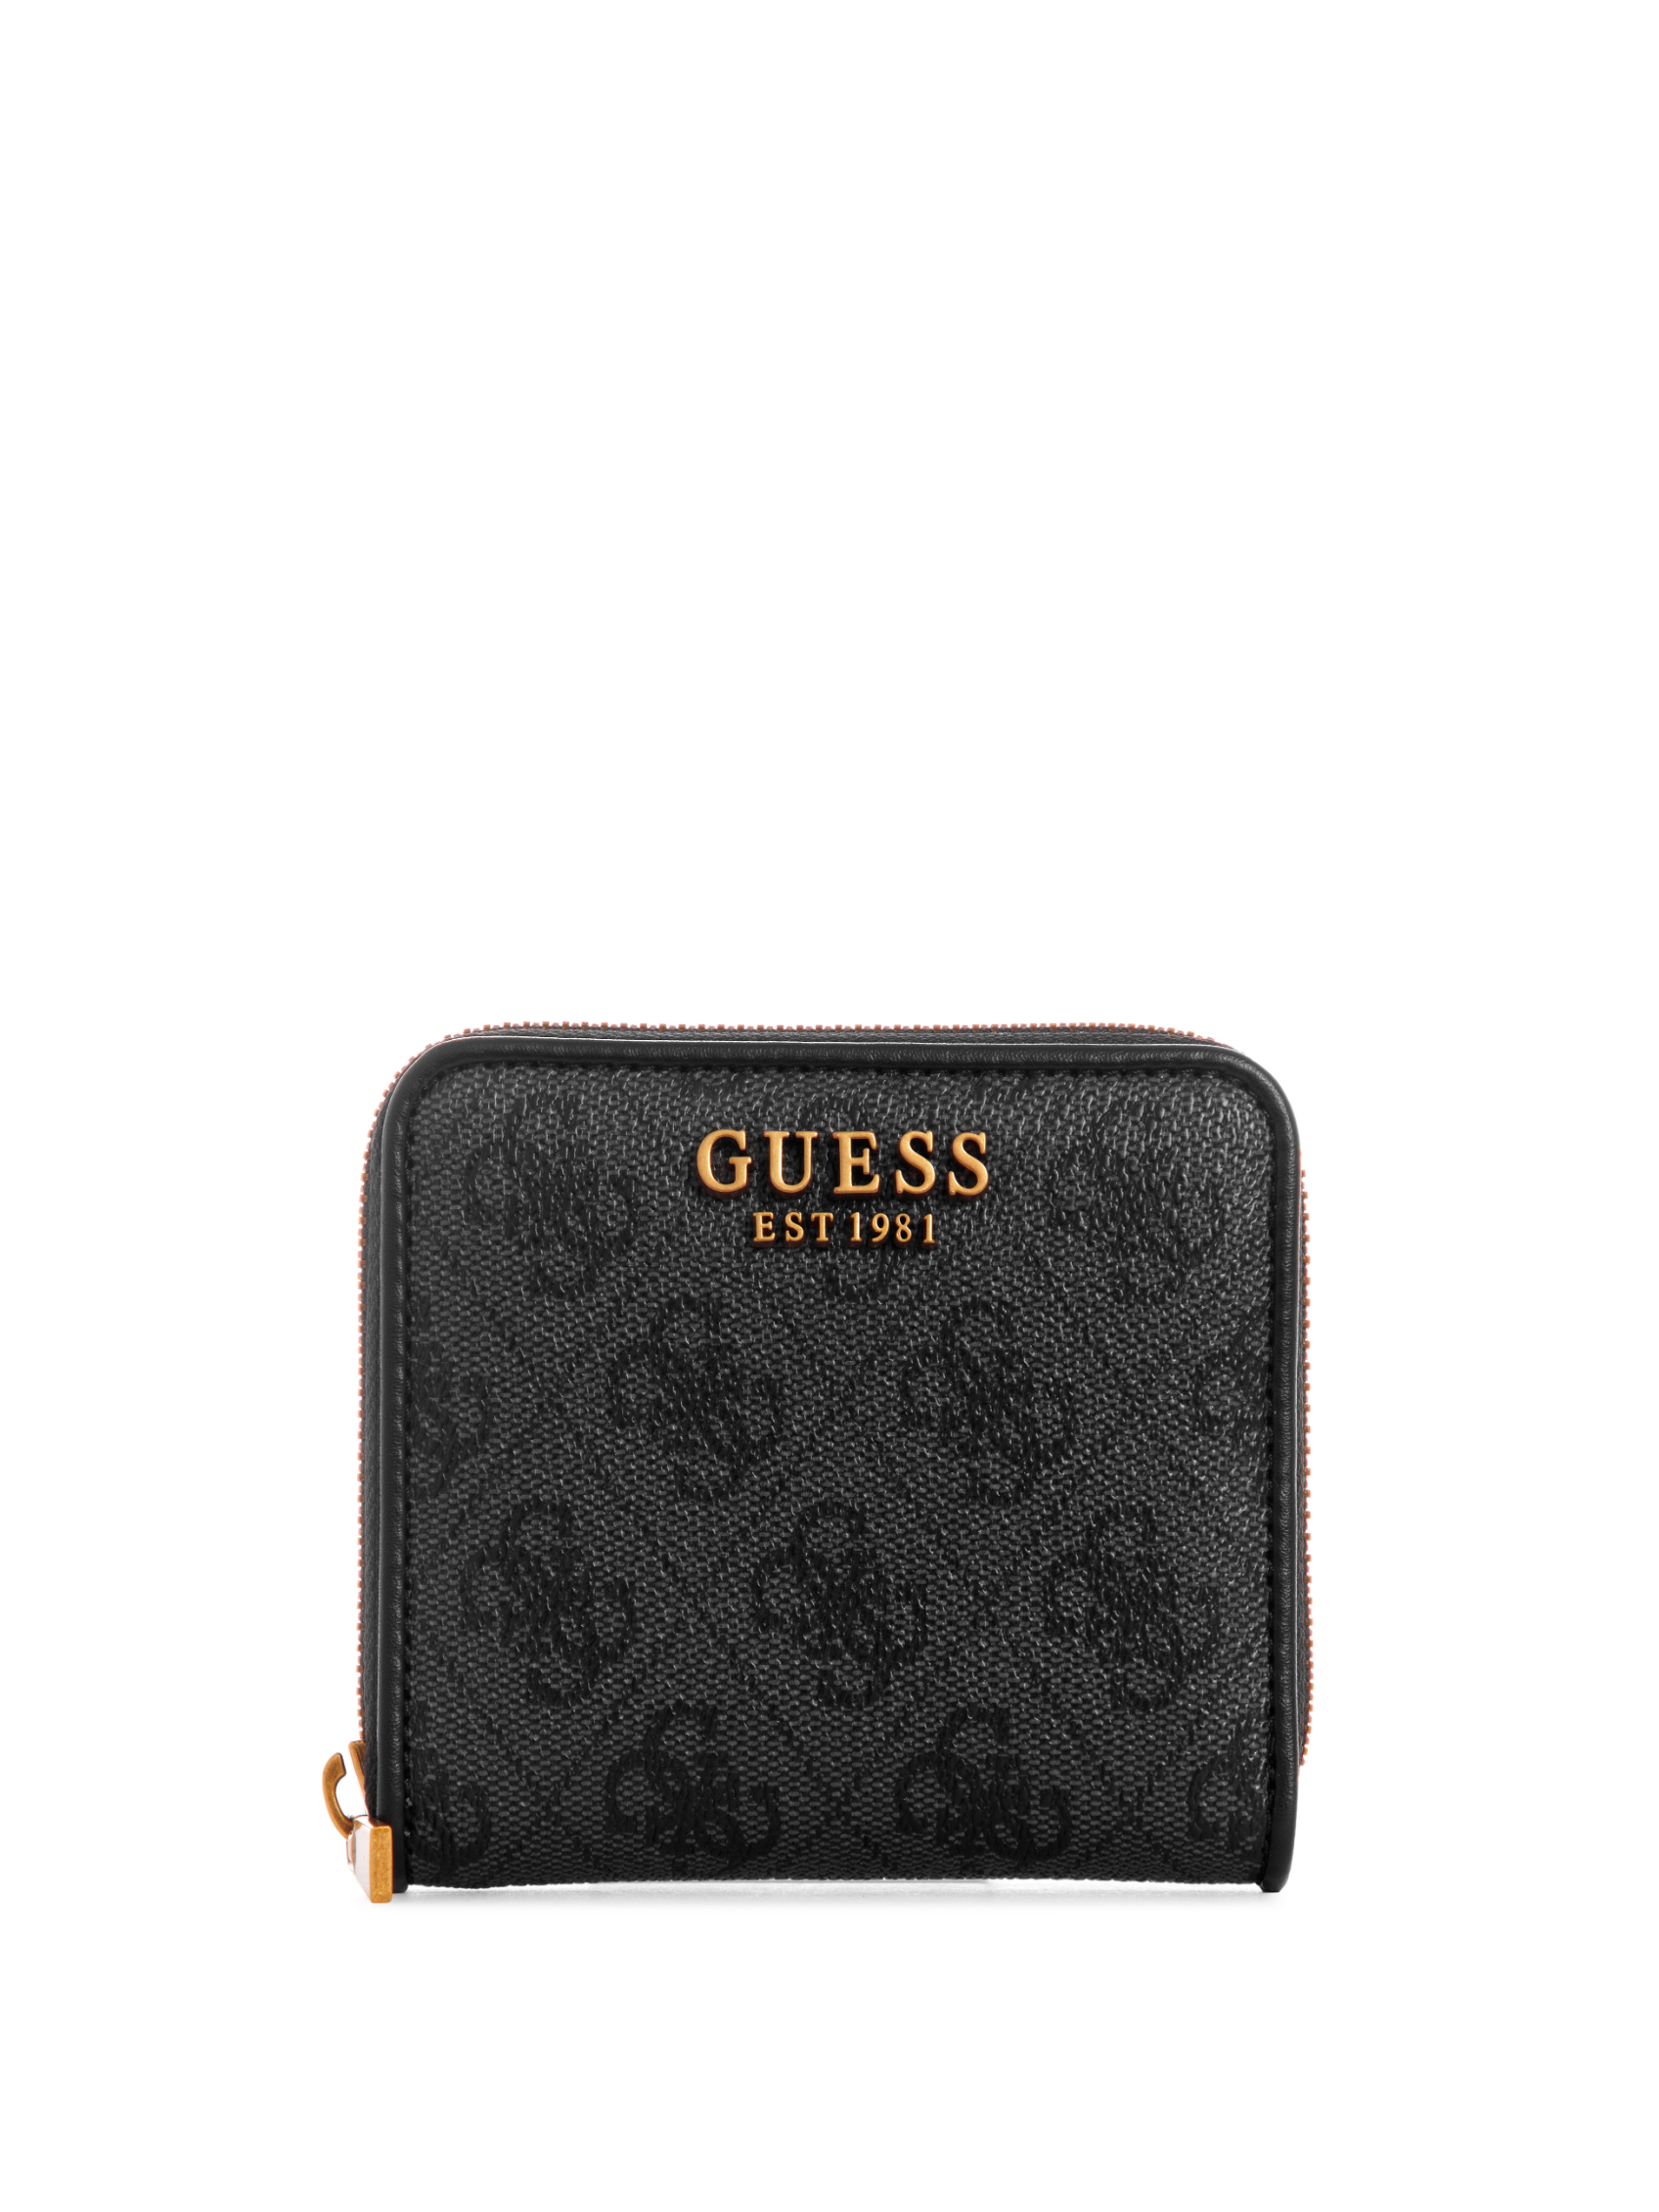 IZZY SLING SMALL ZIP AROUND | Guess Philippines